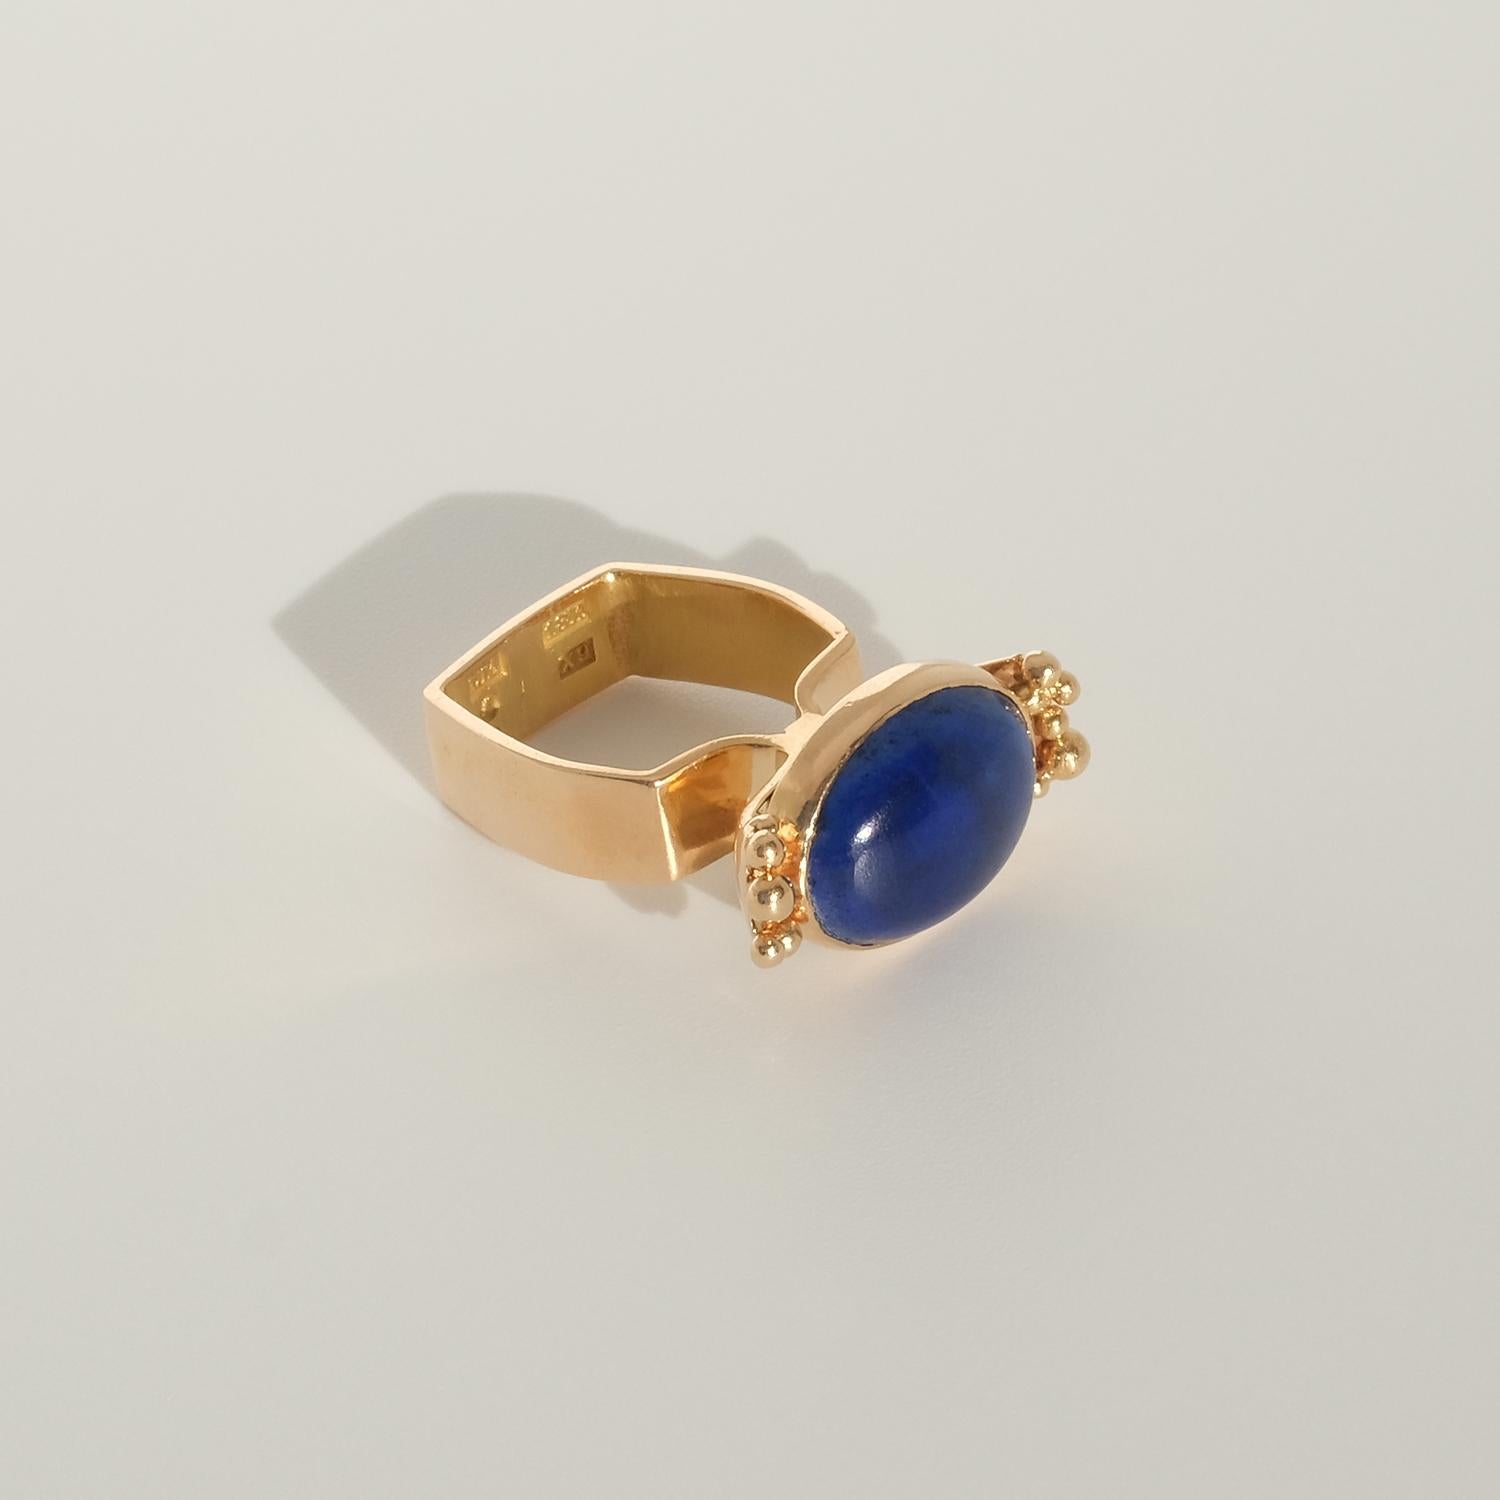 18 K Gold Ring with a Cabochon Cut Lapis Lazuli Stone, Made in 1972 For Sale 6